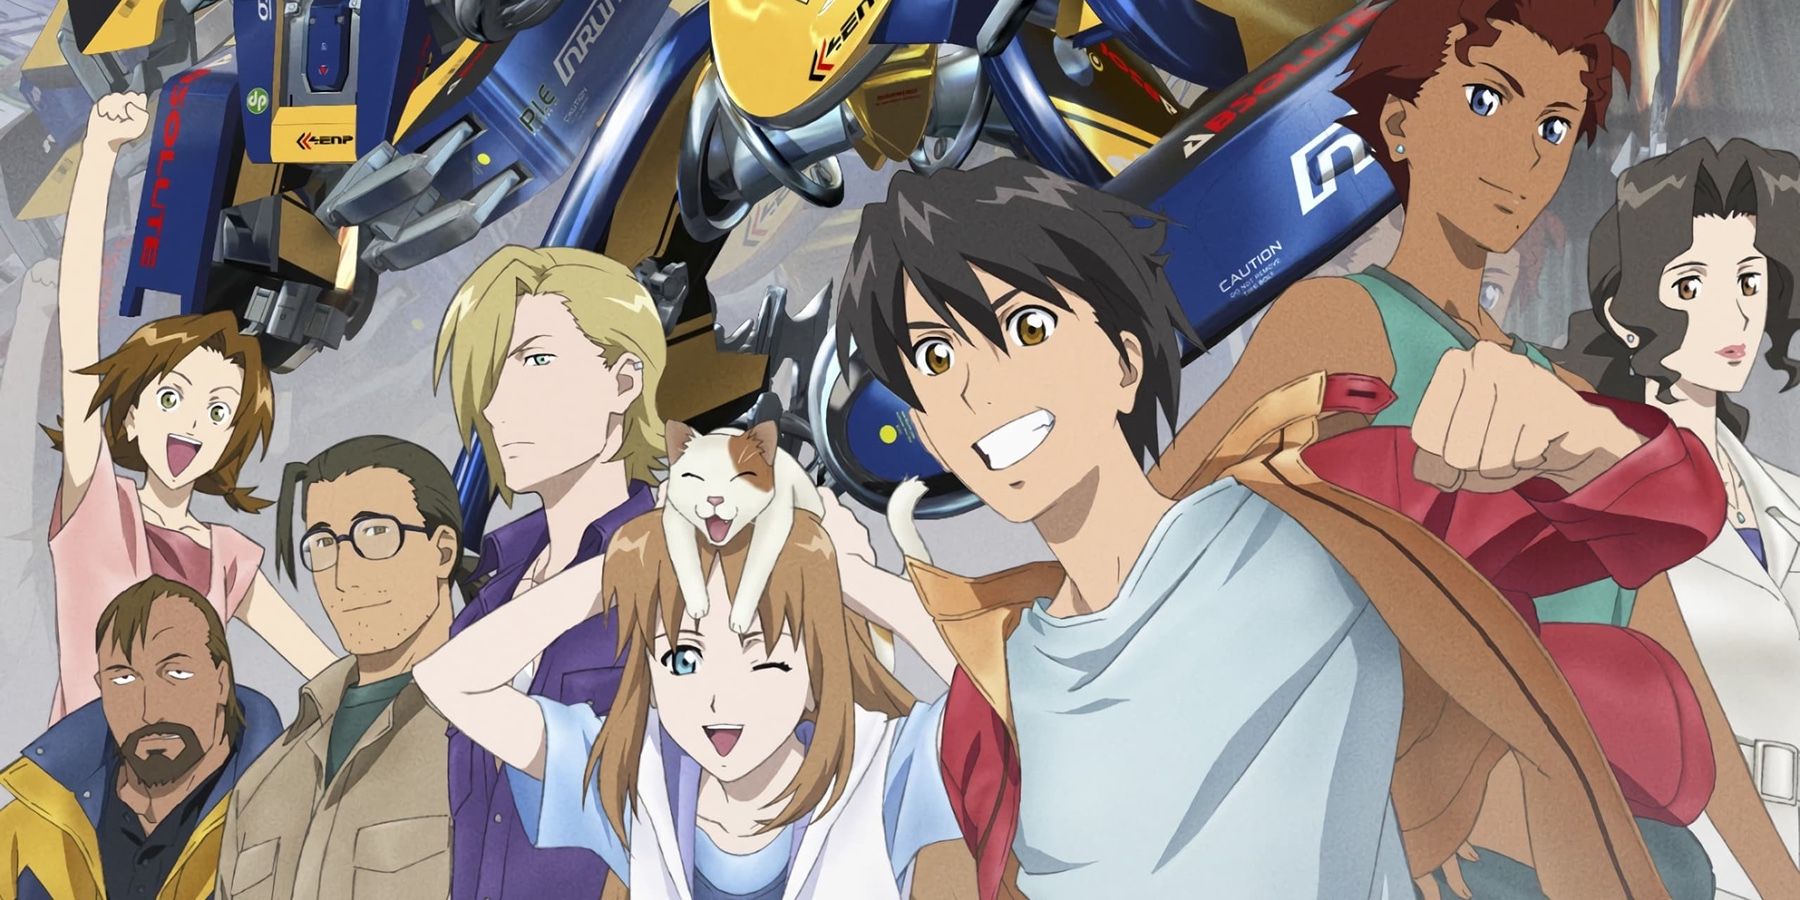 The main cast of Toonami and Production I.G anime Immortal Grand Prix